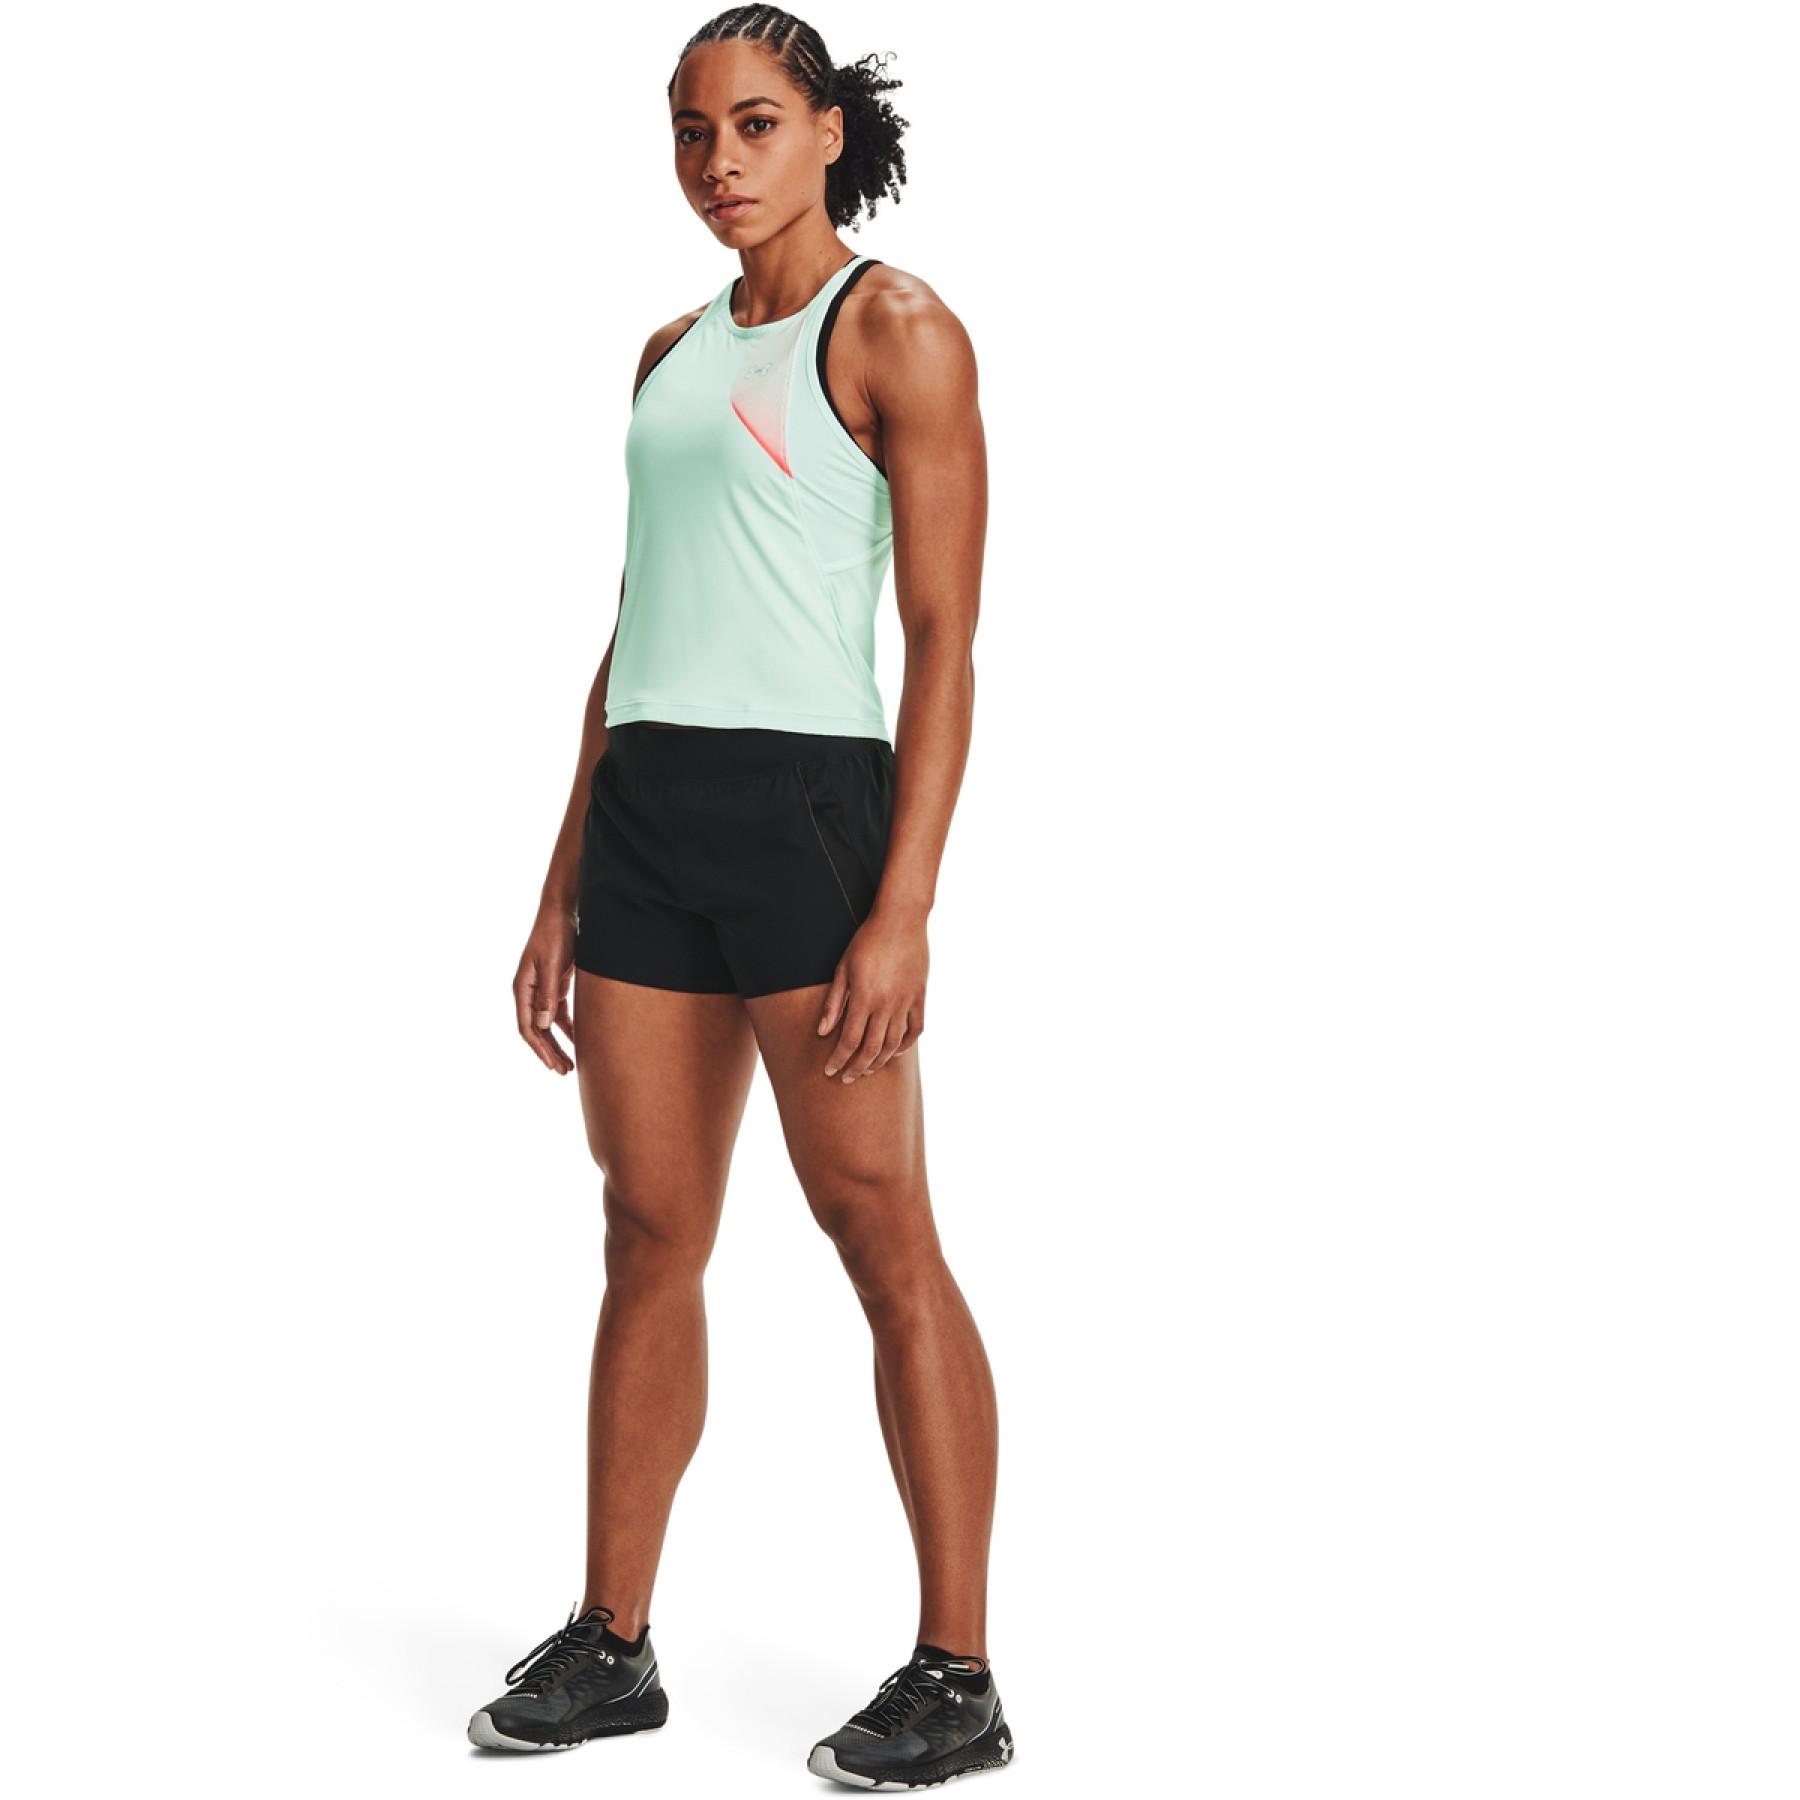 Damski tank top Under Armour Qualifier iso-chill